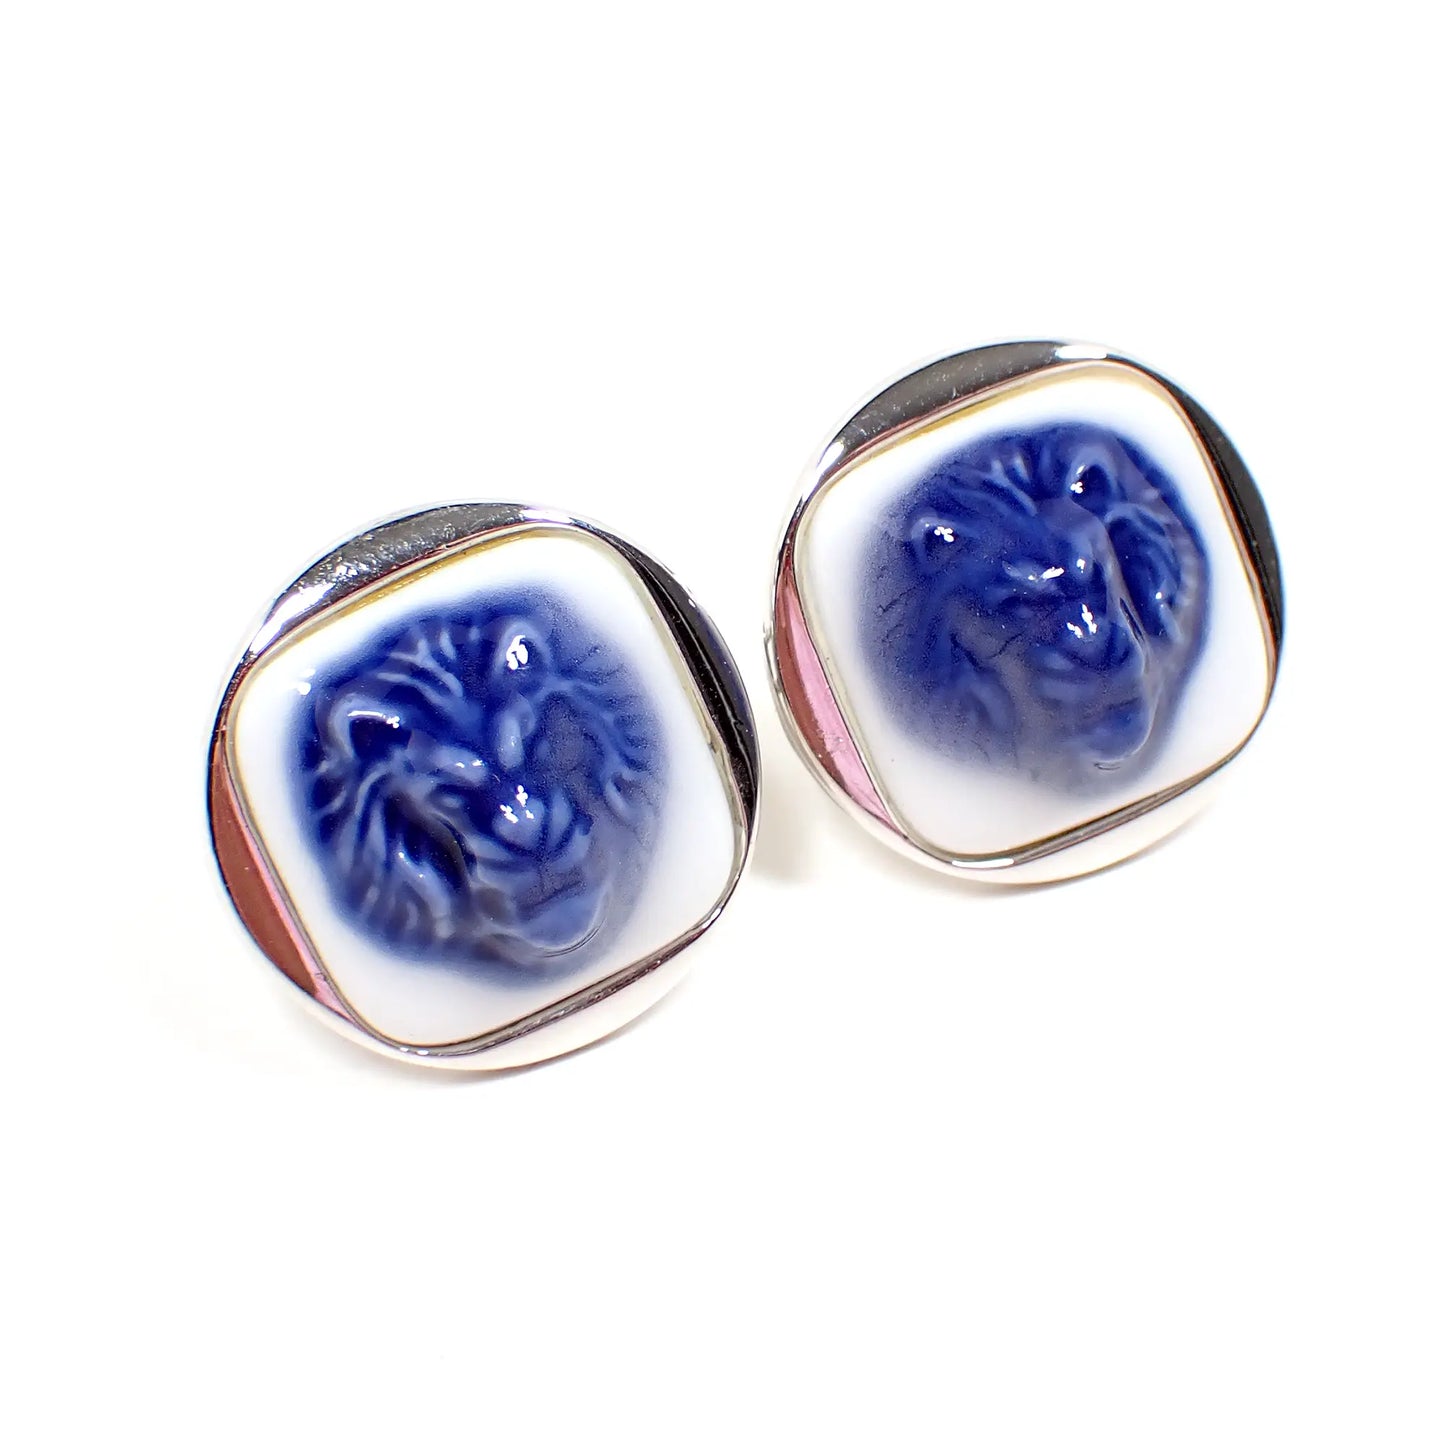 Swank and Royal Copenhagen Blue and White Lion Vintage Cufflinks, Silver Tone Round Porcelain Cuff Links